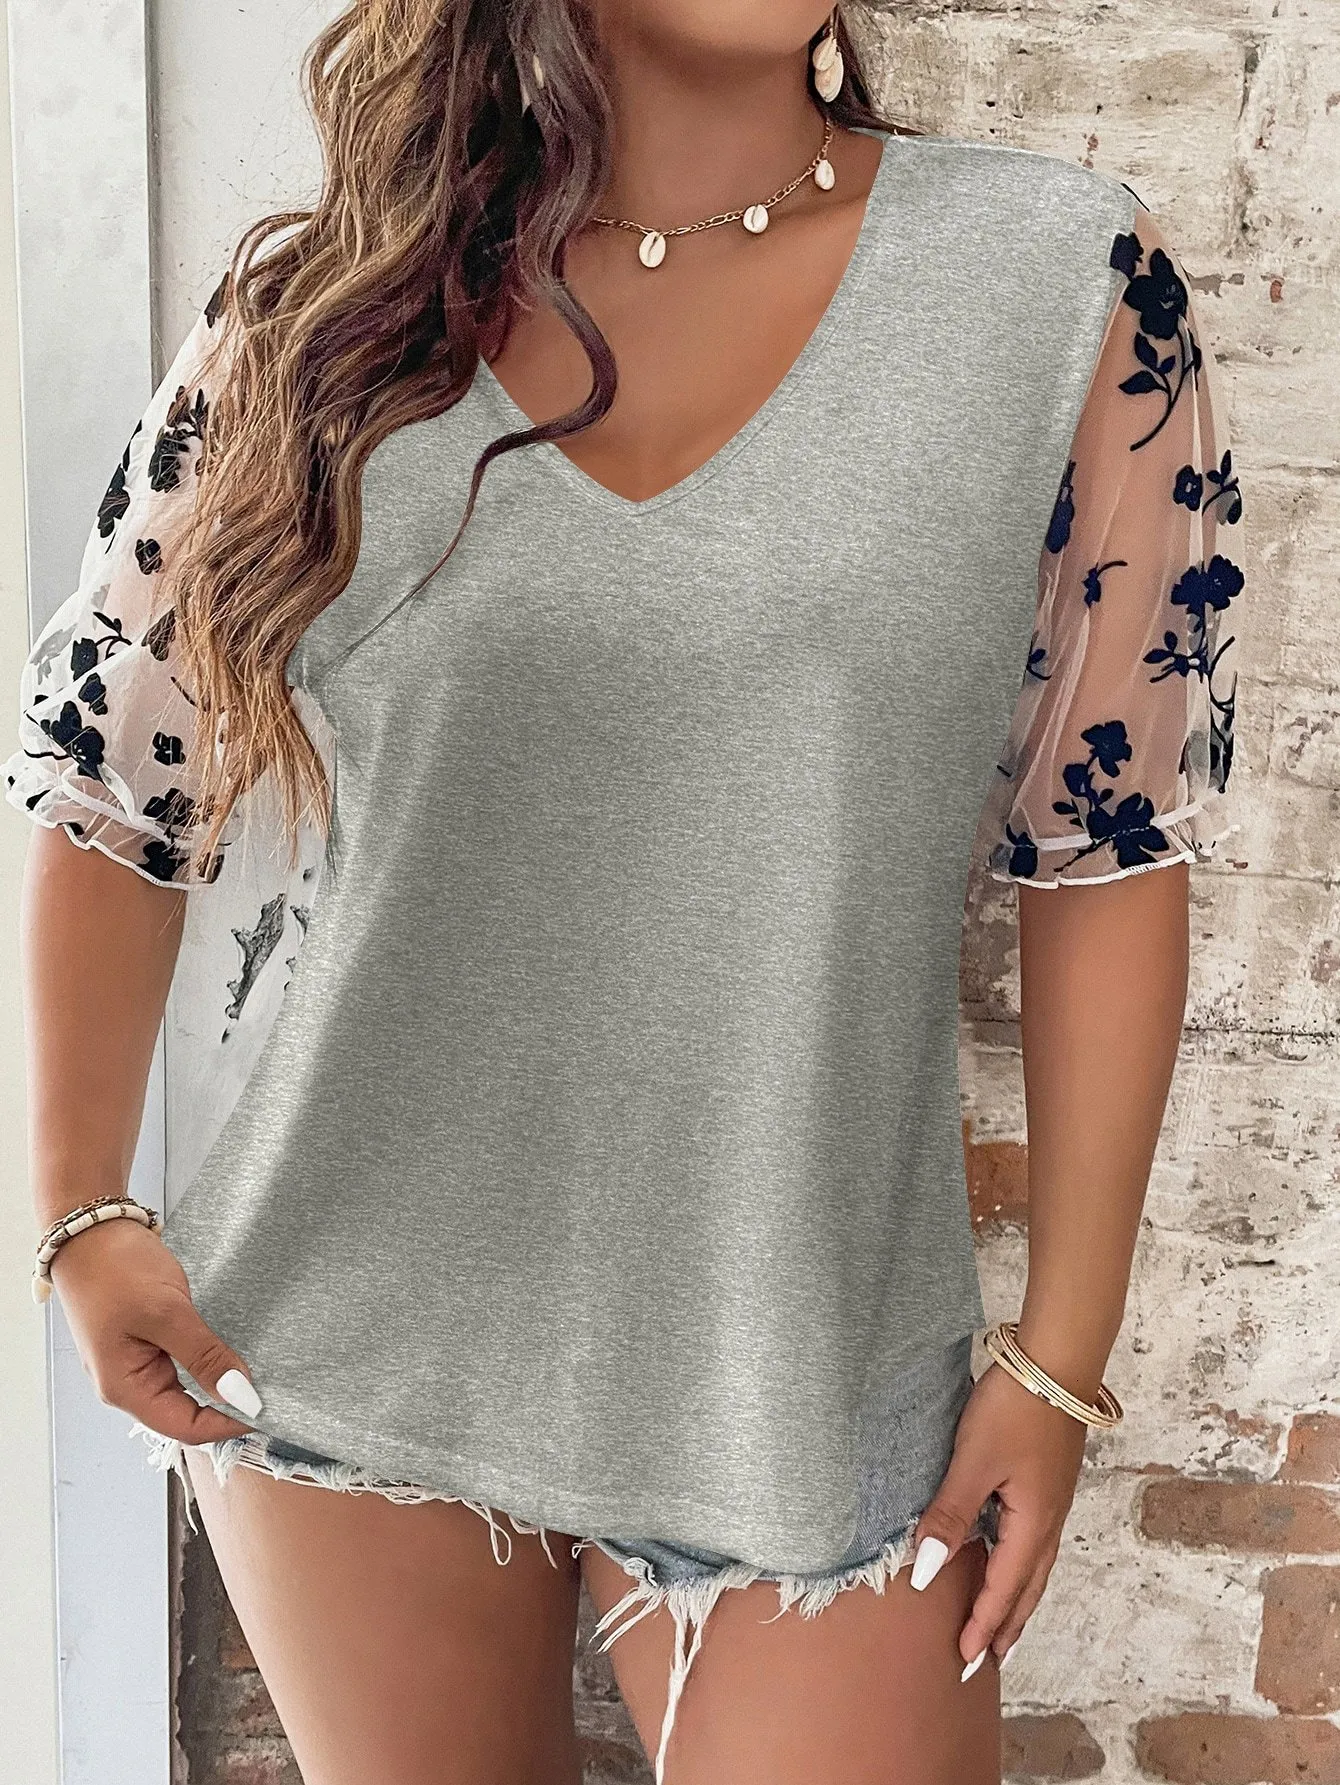 Dames T-shirt Grijs Blouses Dames Zomer 4XL Mesh Korte mouw Tops Losse Grote Grote maten Casual Oversized T-shirts T-shirt Vrouwelijke outfits 230717